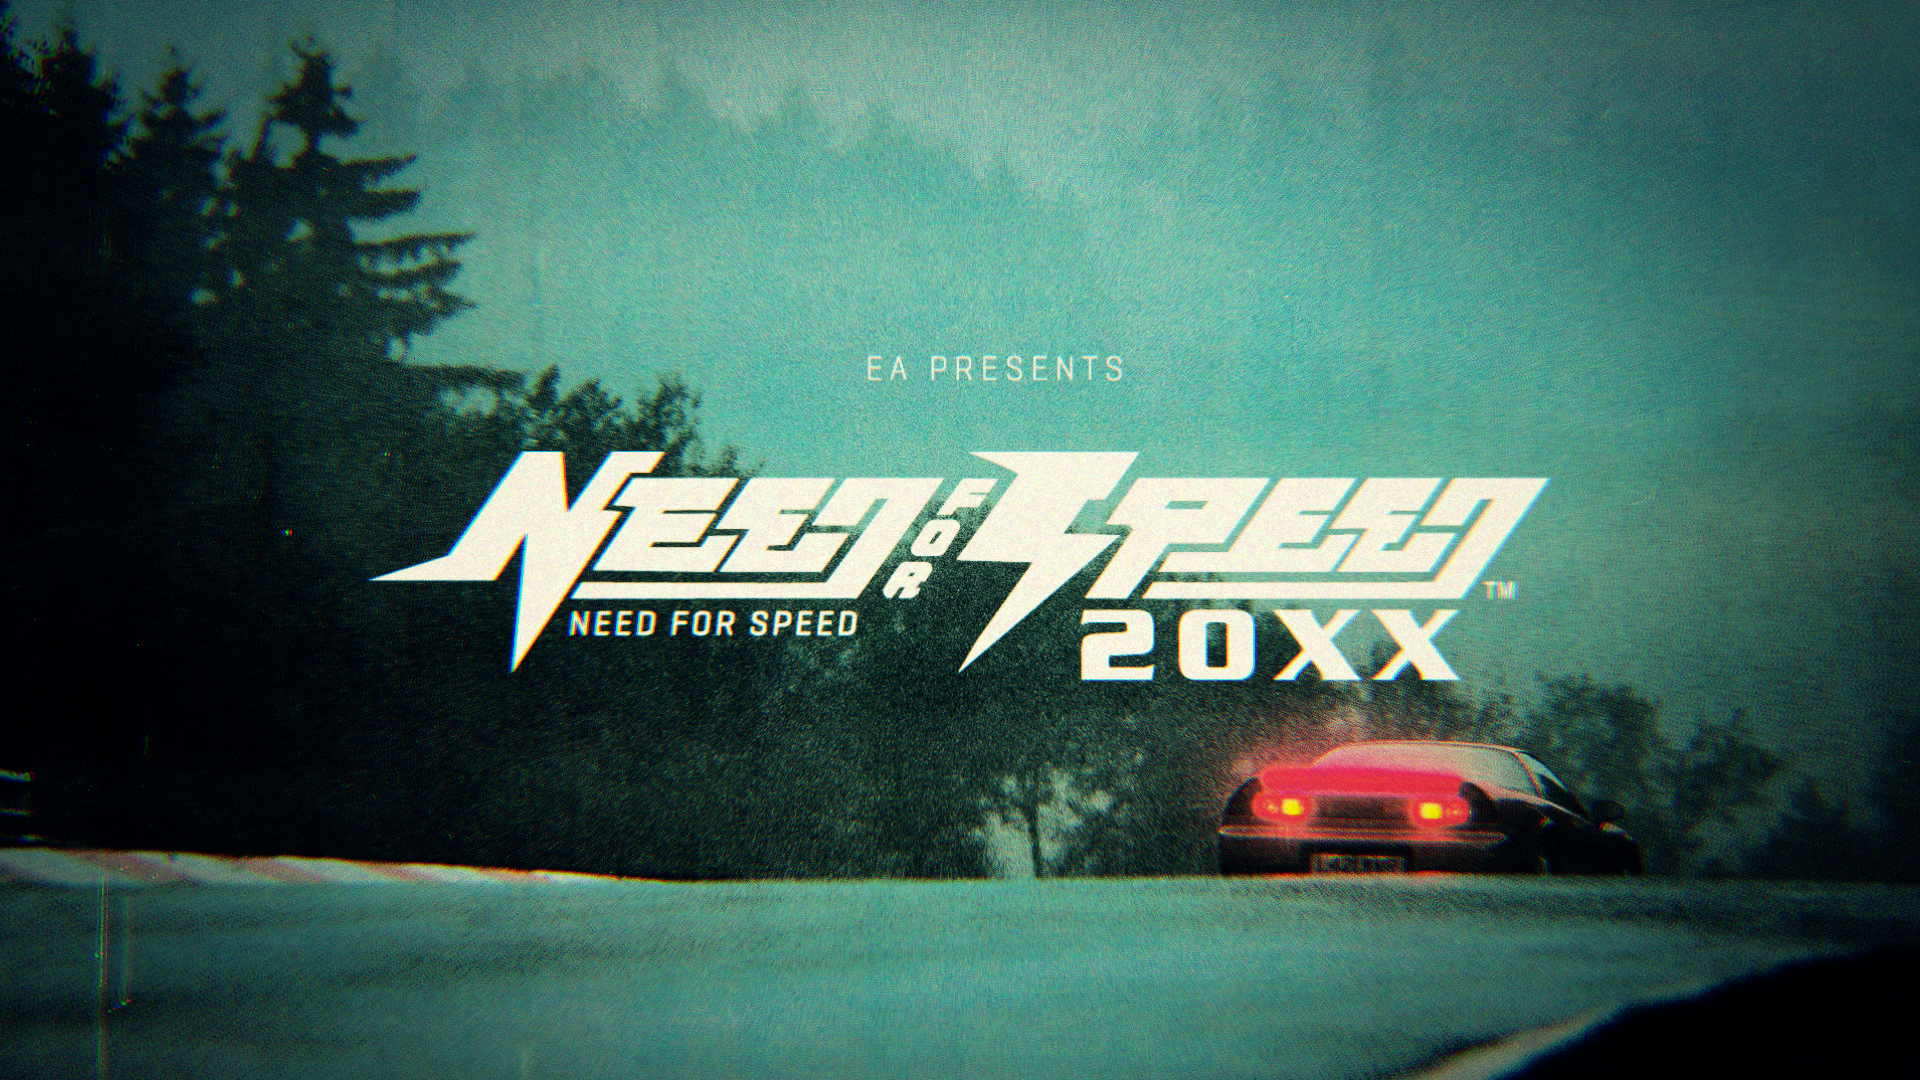 Need logo. Need for Speed лого. Need for Speed надпись. Need for Speed 2015 лого. Need for Speed NFS логотип.